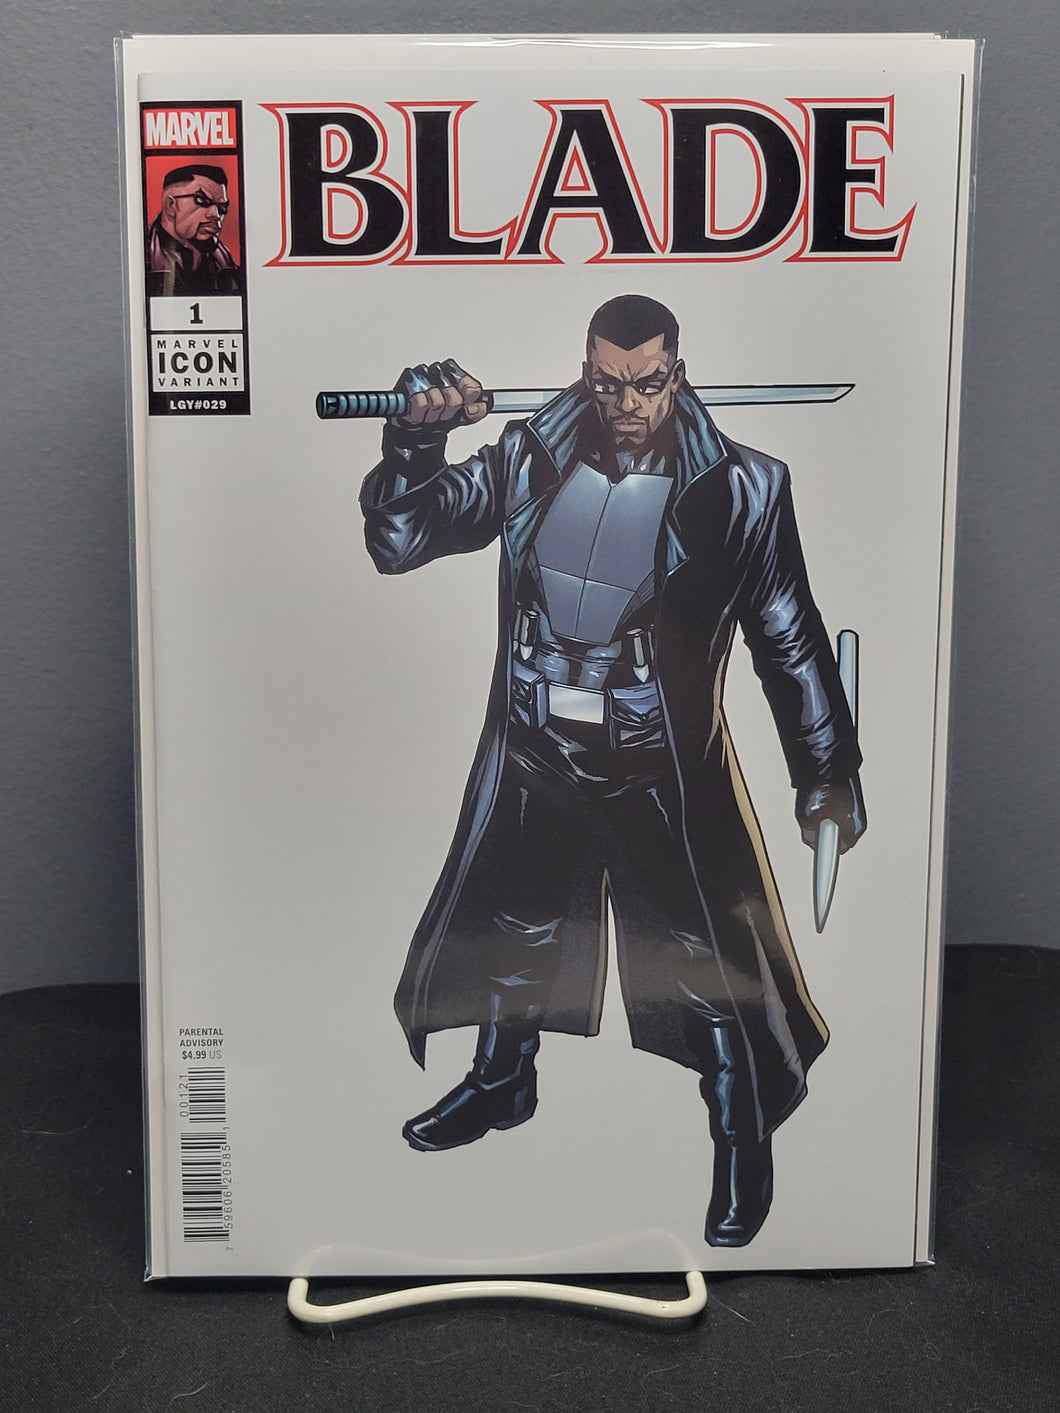 Blade #1 Icon Variant